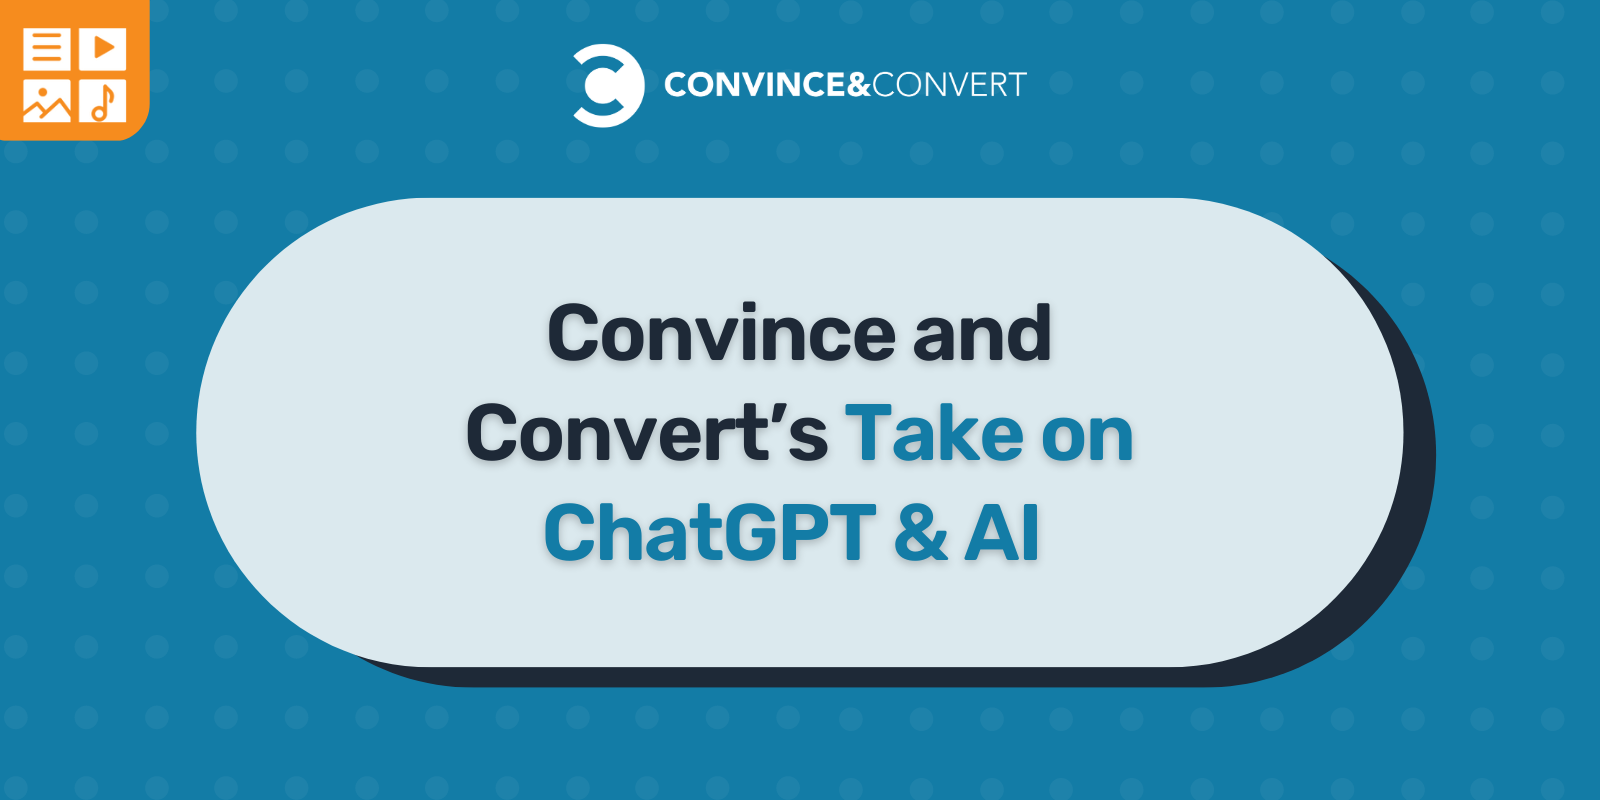 Convince and Convert’s Take on ChatGPT & AI